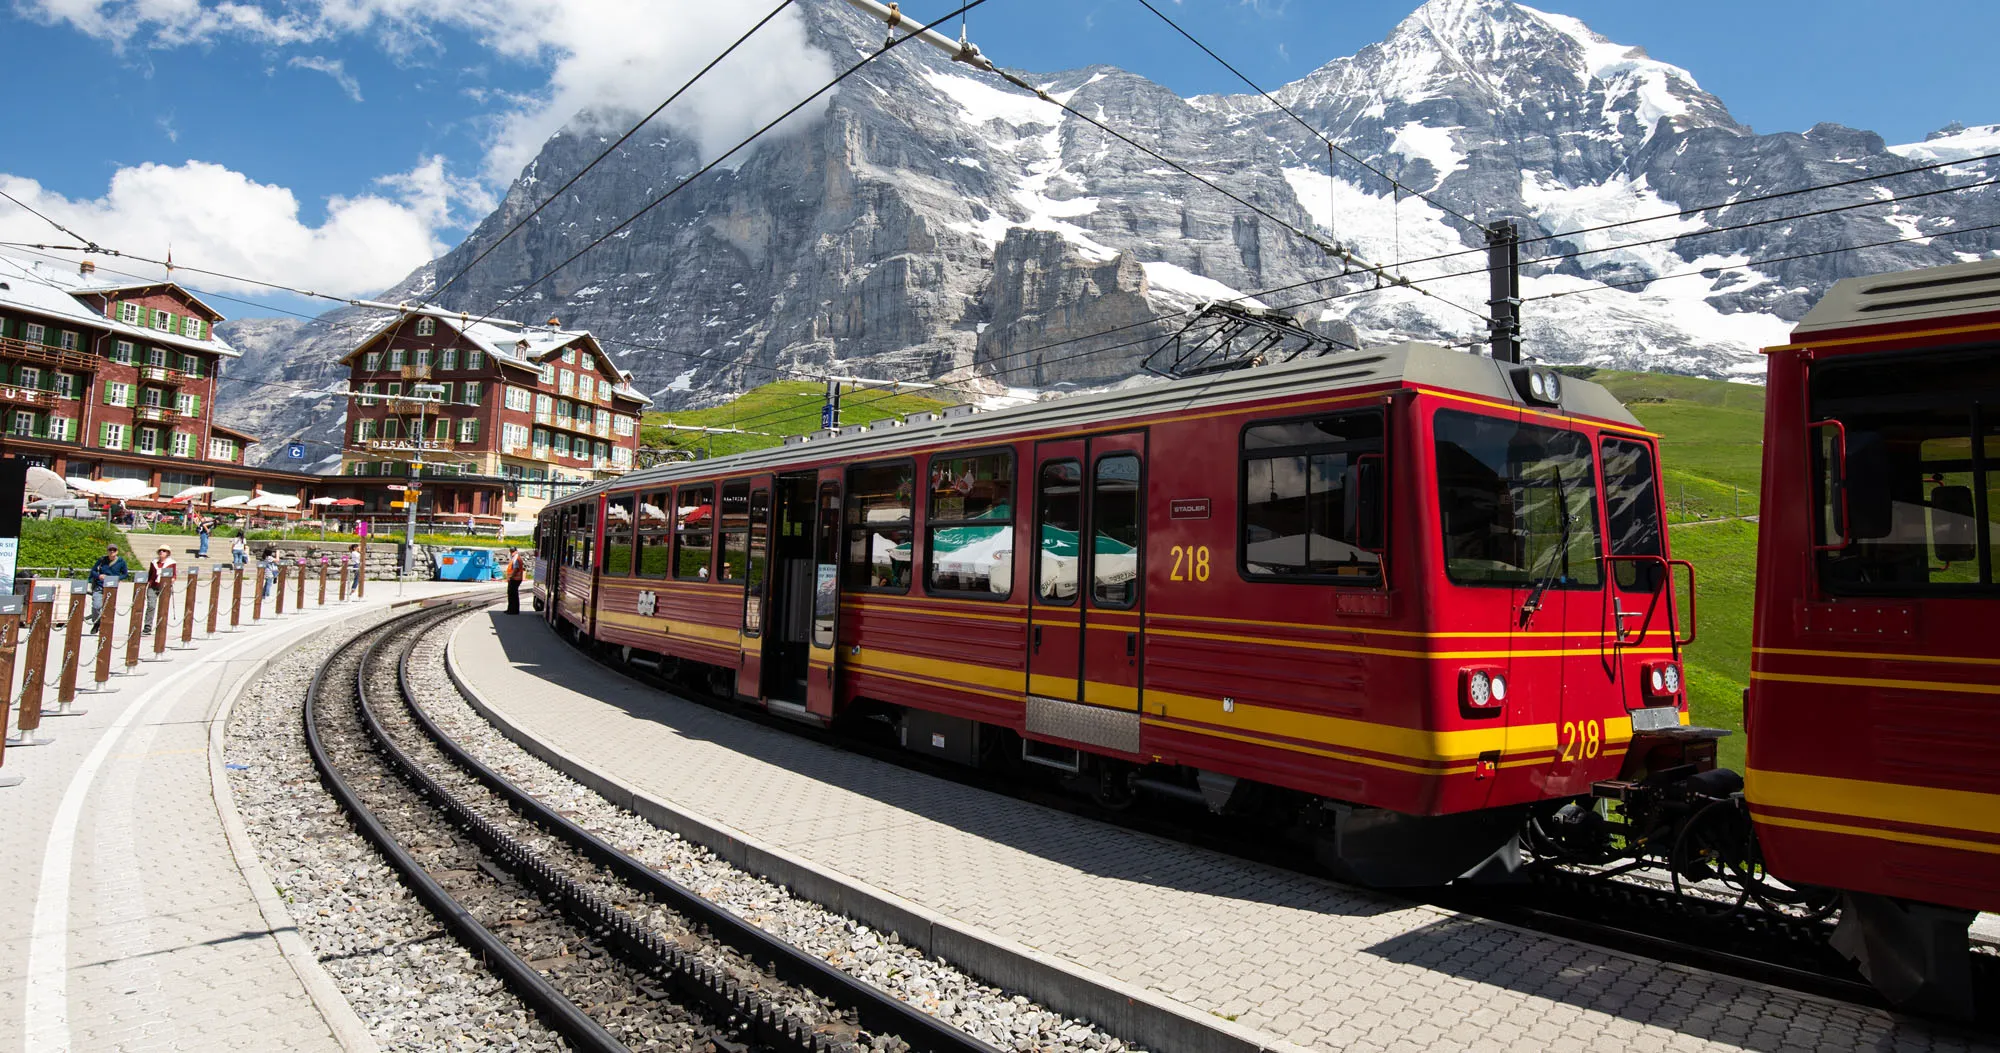 Featured image for “Jungfraujoch or Schilthorn: Which One Should You Visit?”